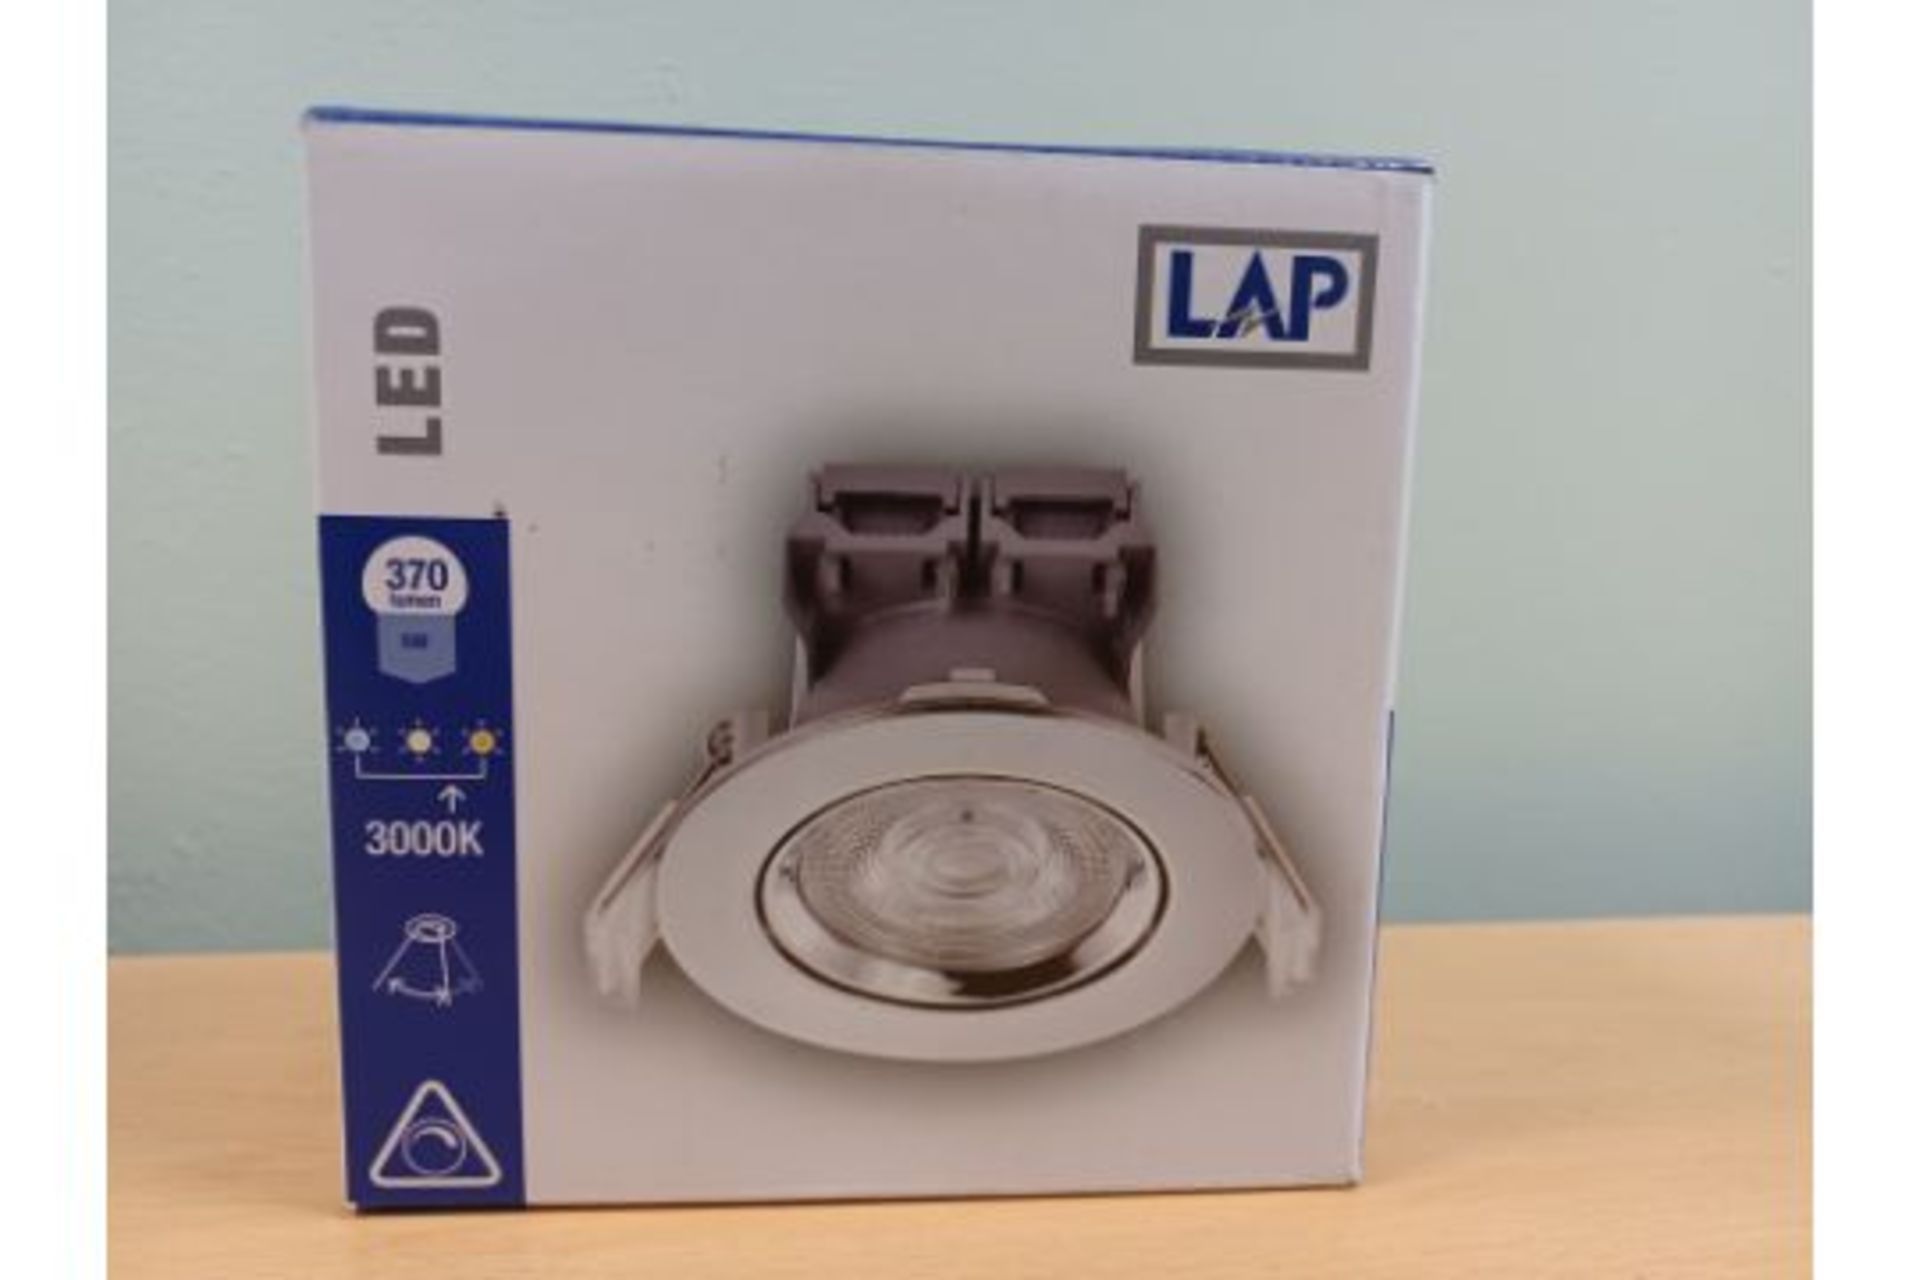 100 X NEW BOXED LAP LED CHROME DOWNLIGHTS. ROTATABLE. 370 LUMEN. 5W. 3000K. 20,000 HOURS LIFE. (